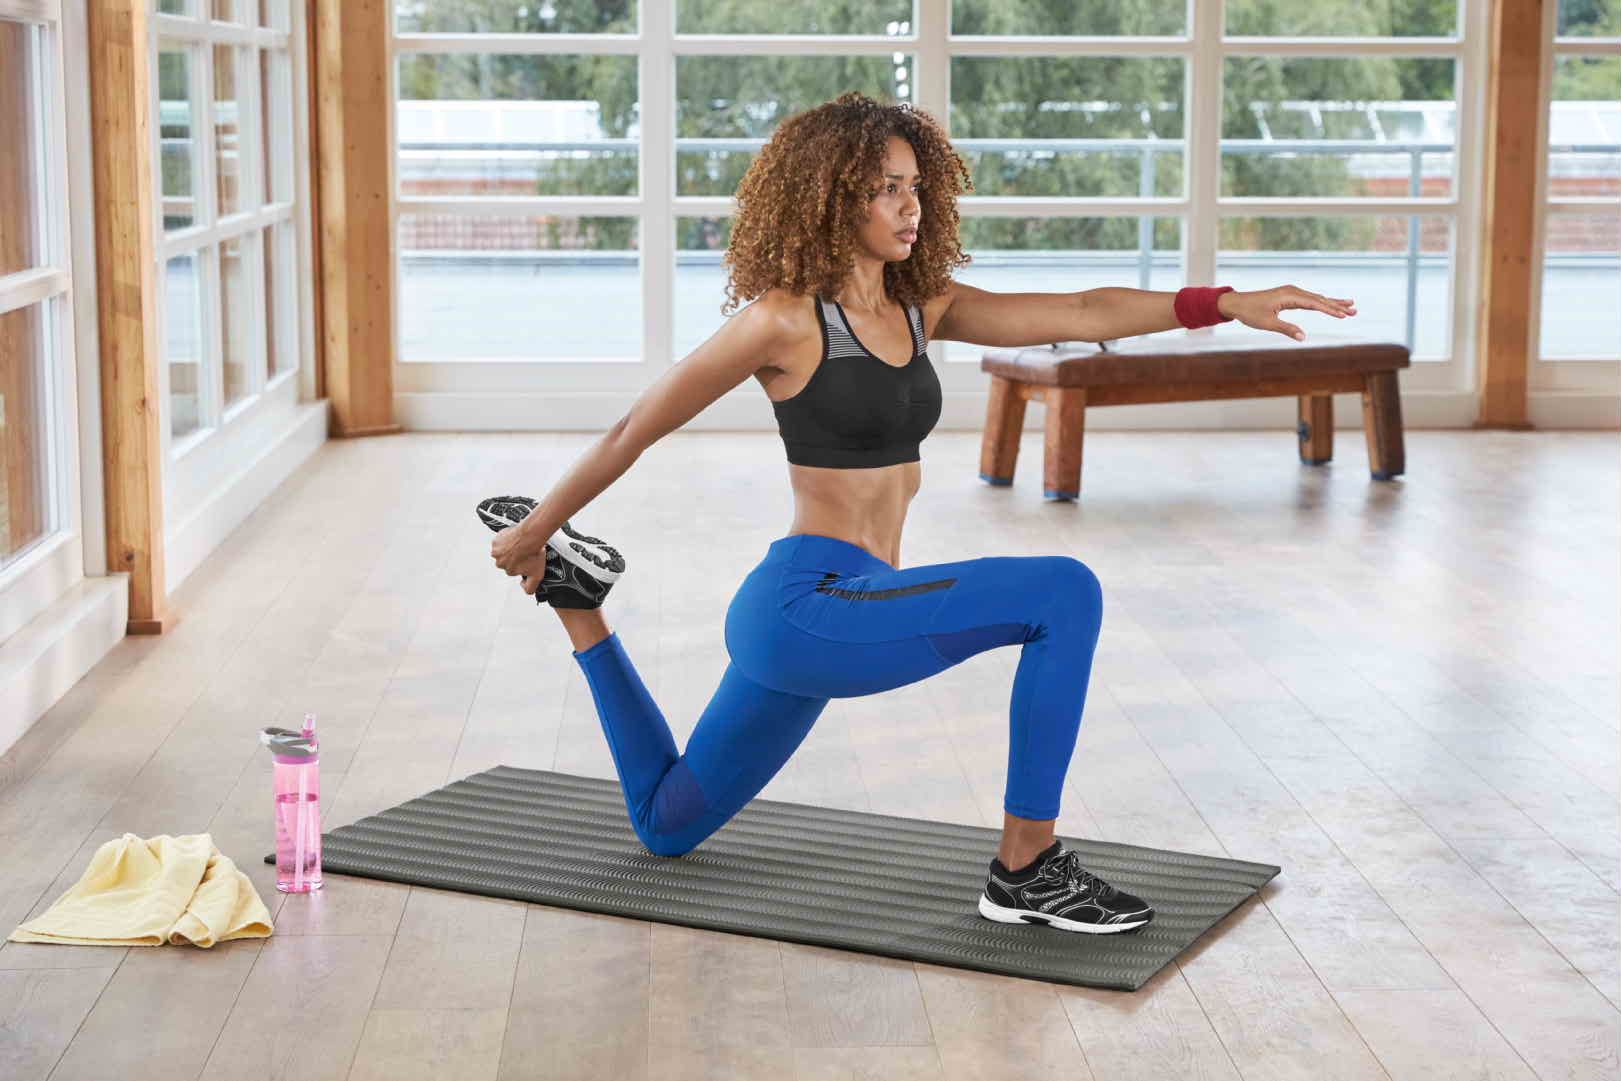 Lidl have launched their own home-gym range, with prices starting at